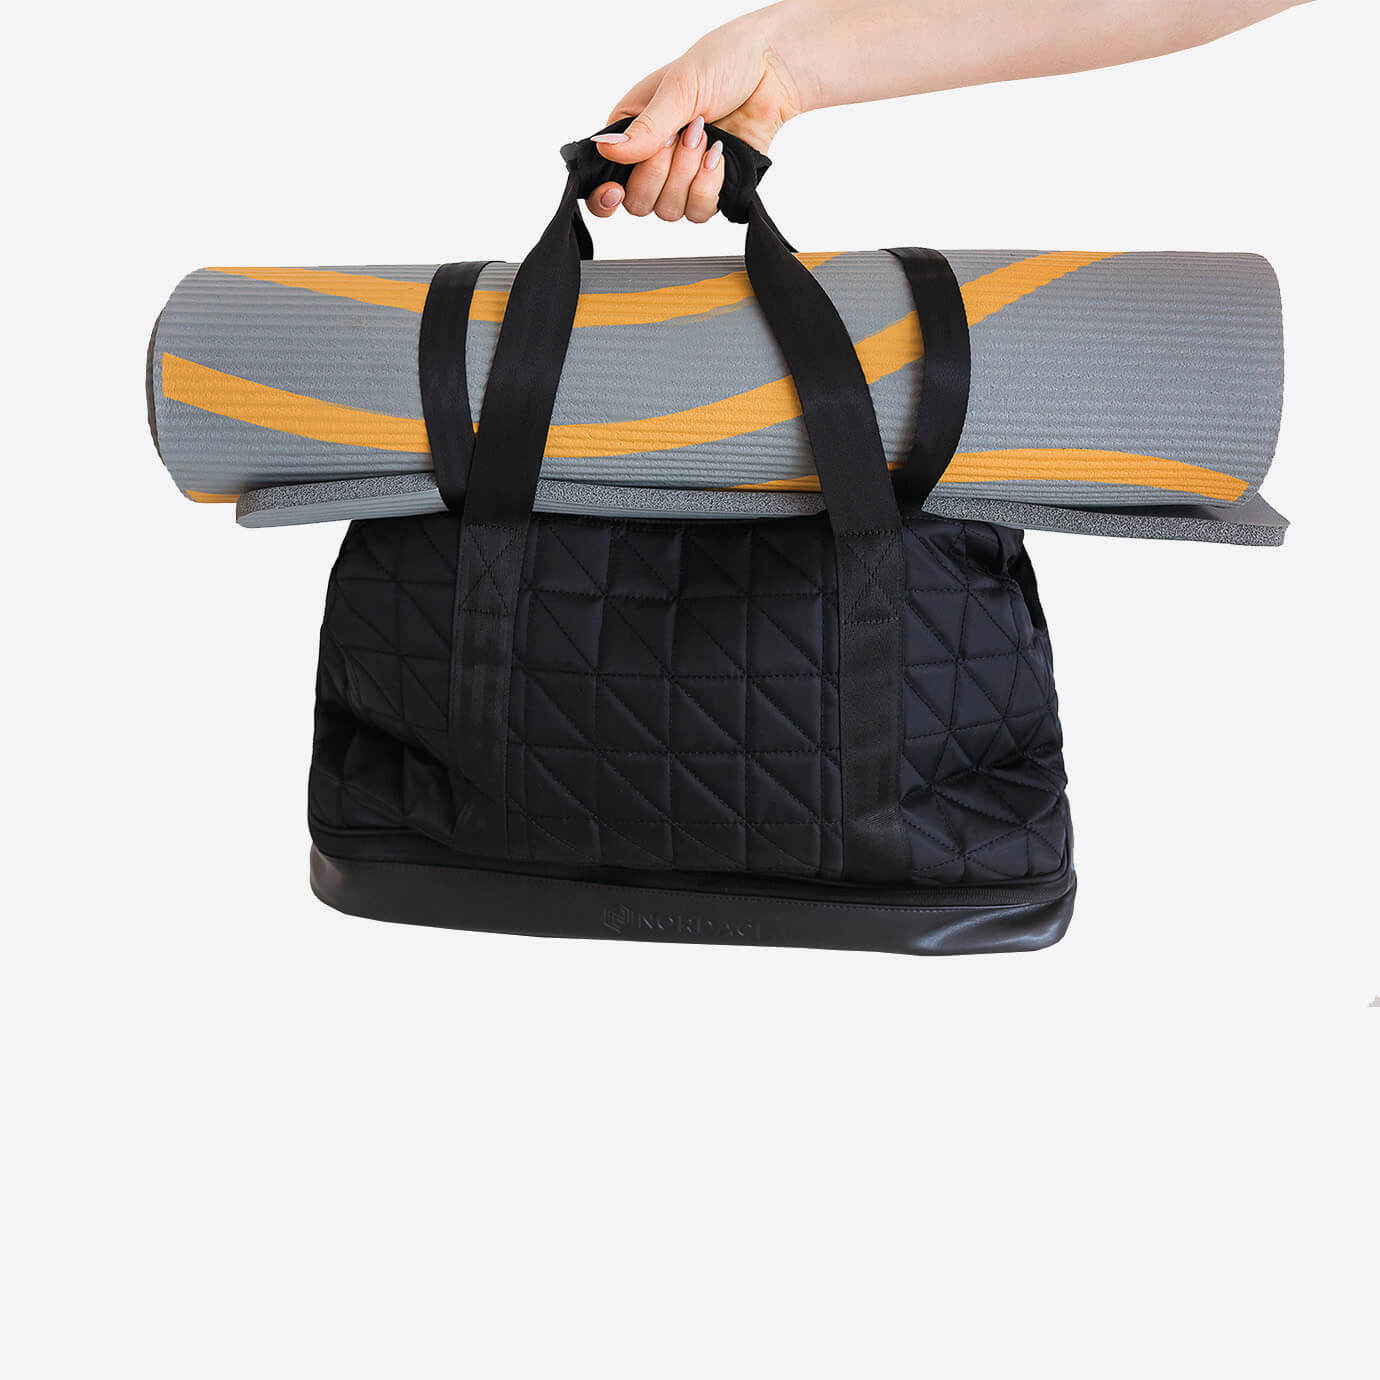 Nordace - 8 Reasons Why Nordace Orléans Duffel Bag Is the Best Bag